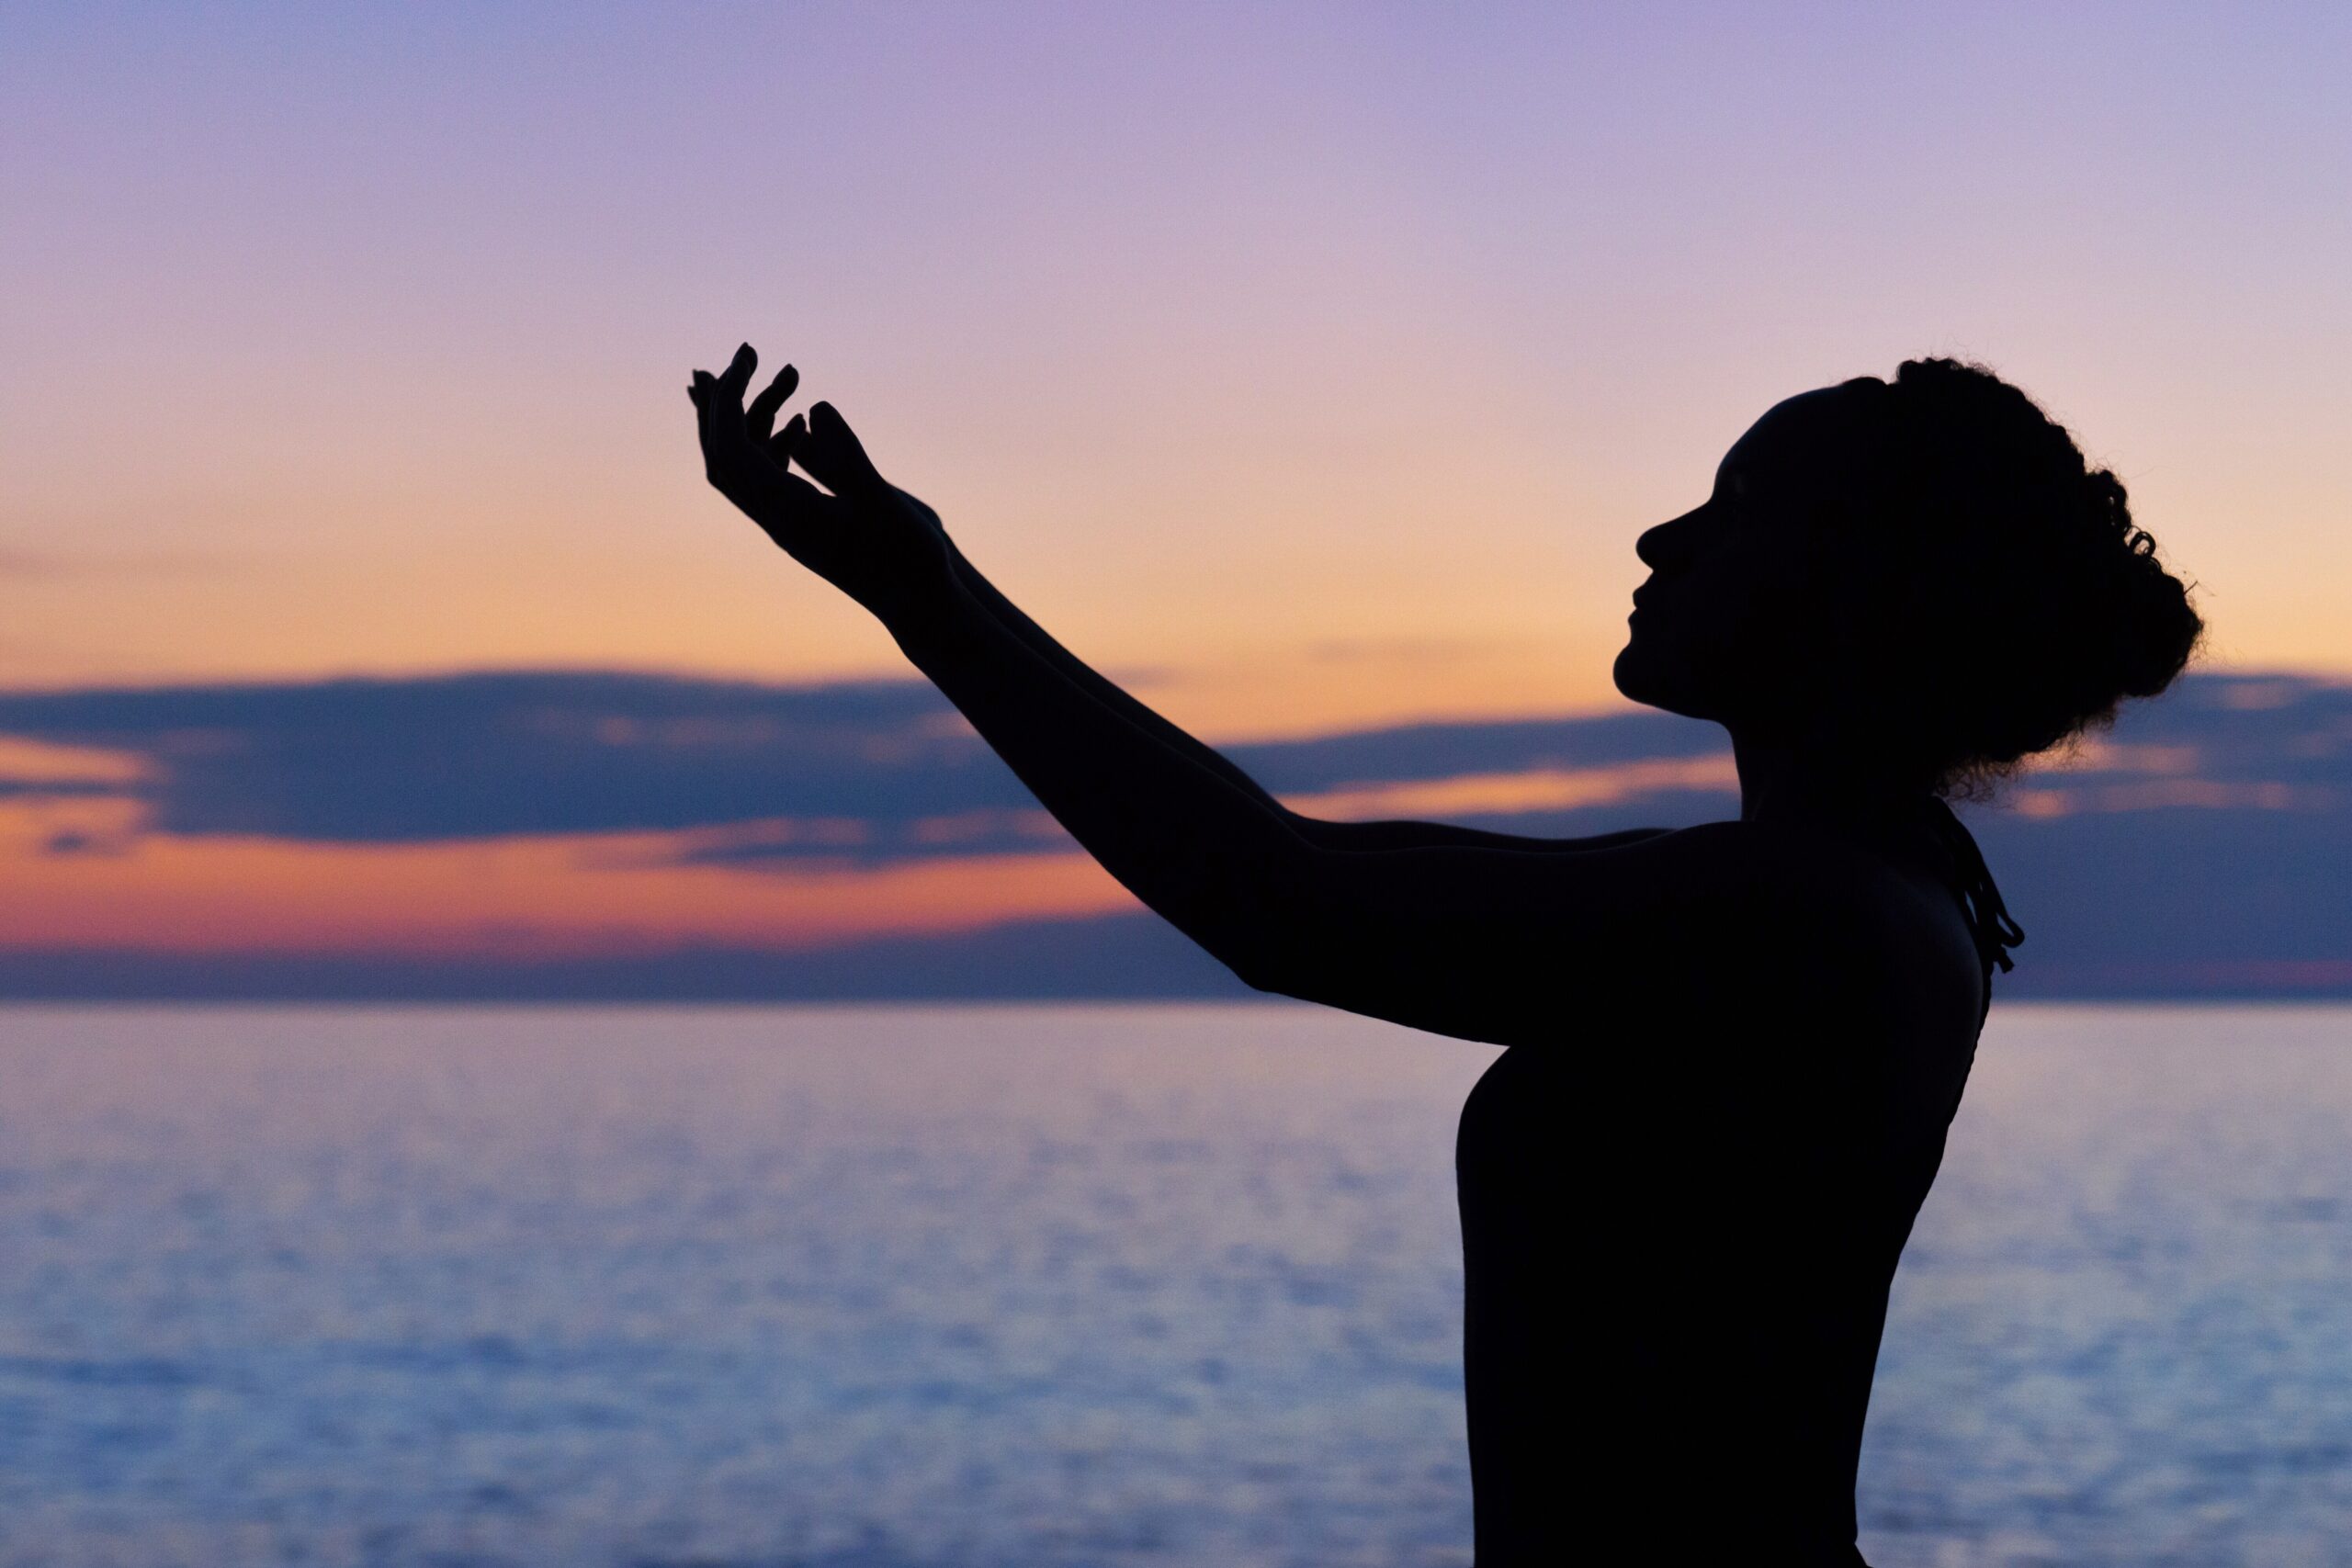 A silhouette of a person holding their arms against the sky, set against a body of water and sunset over mountains